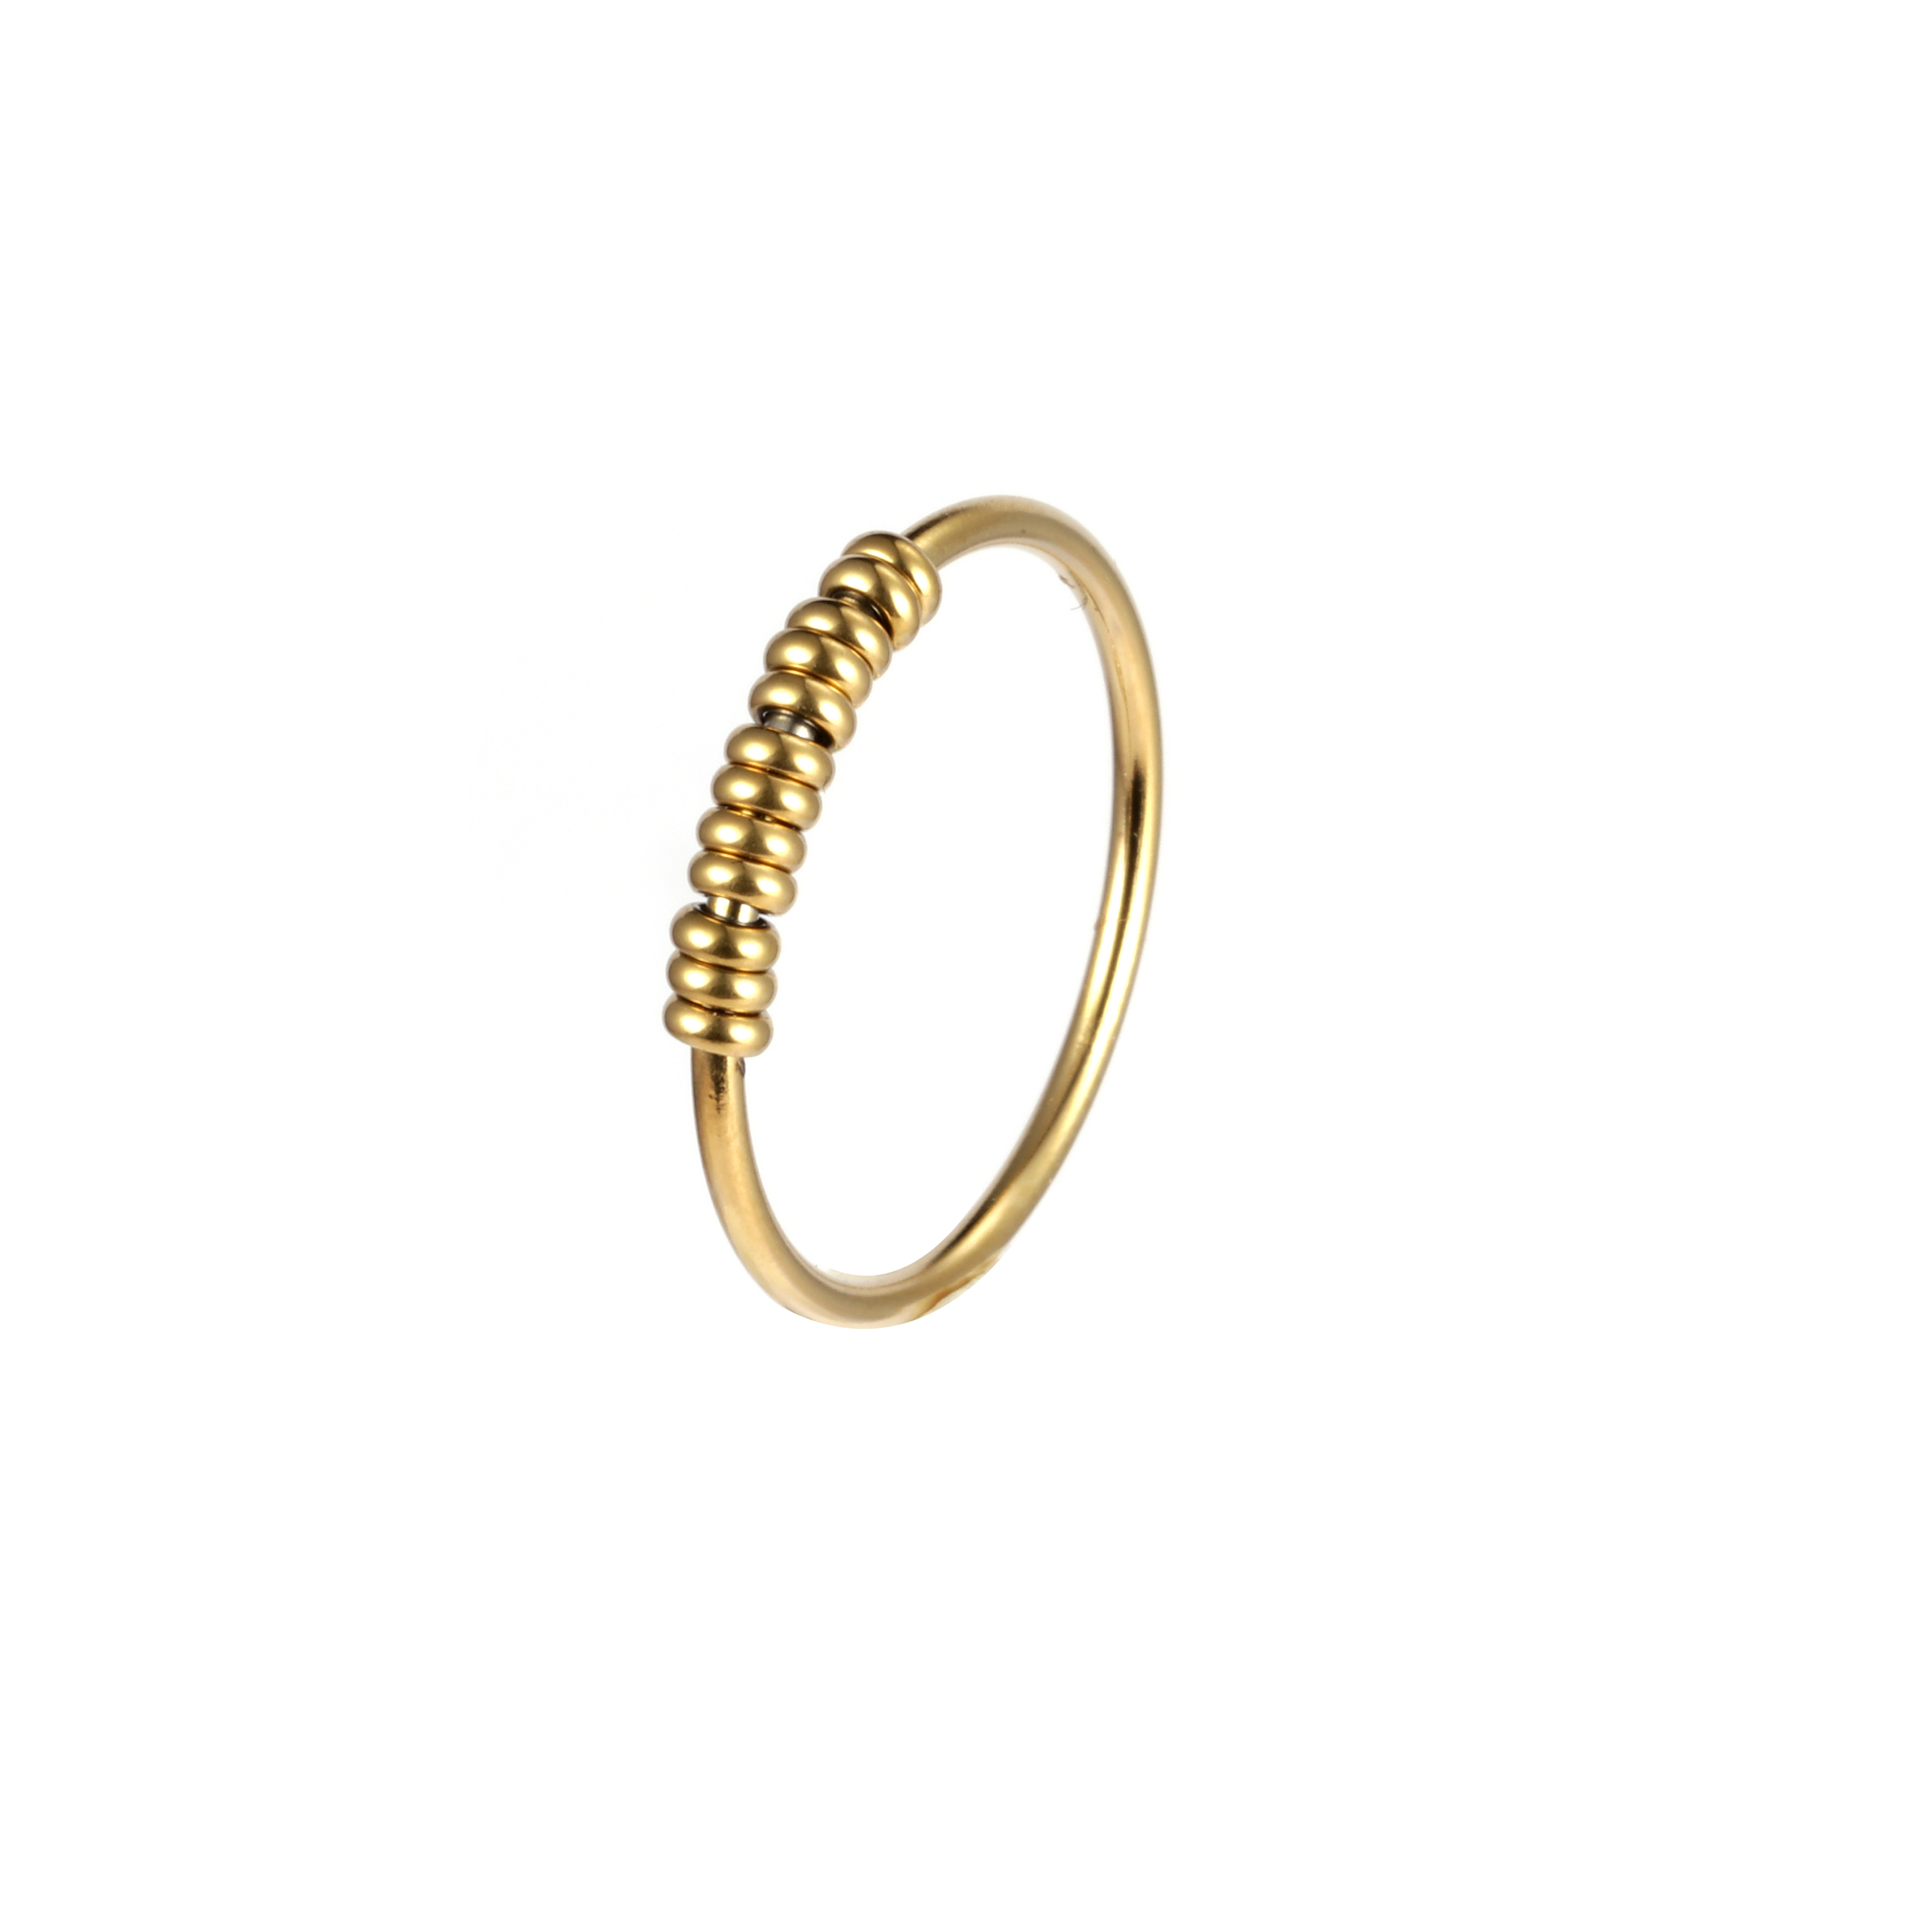 Movable Brass Beads Fashion Ring